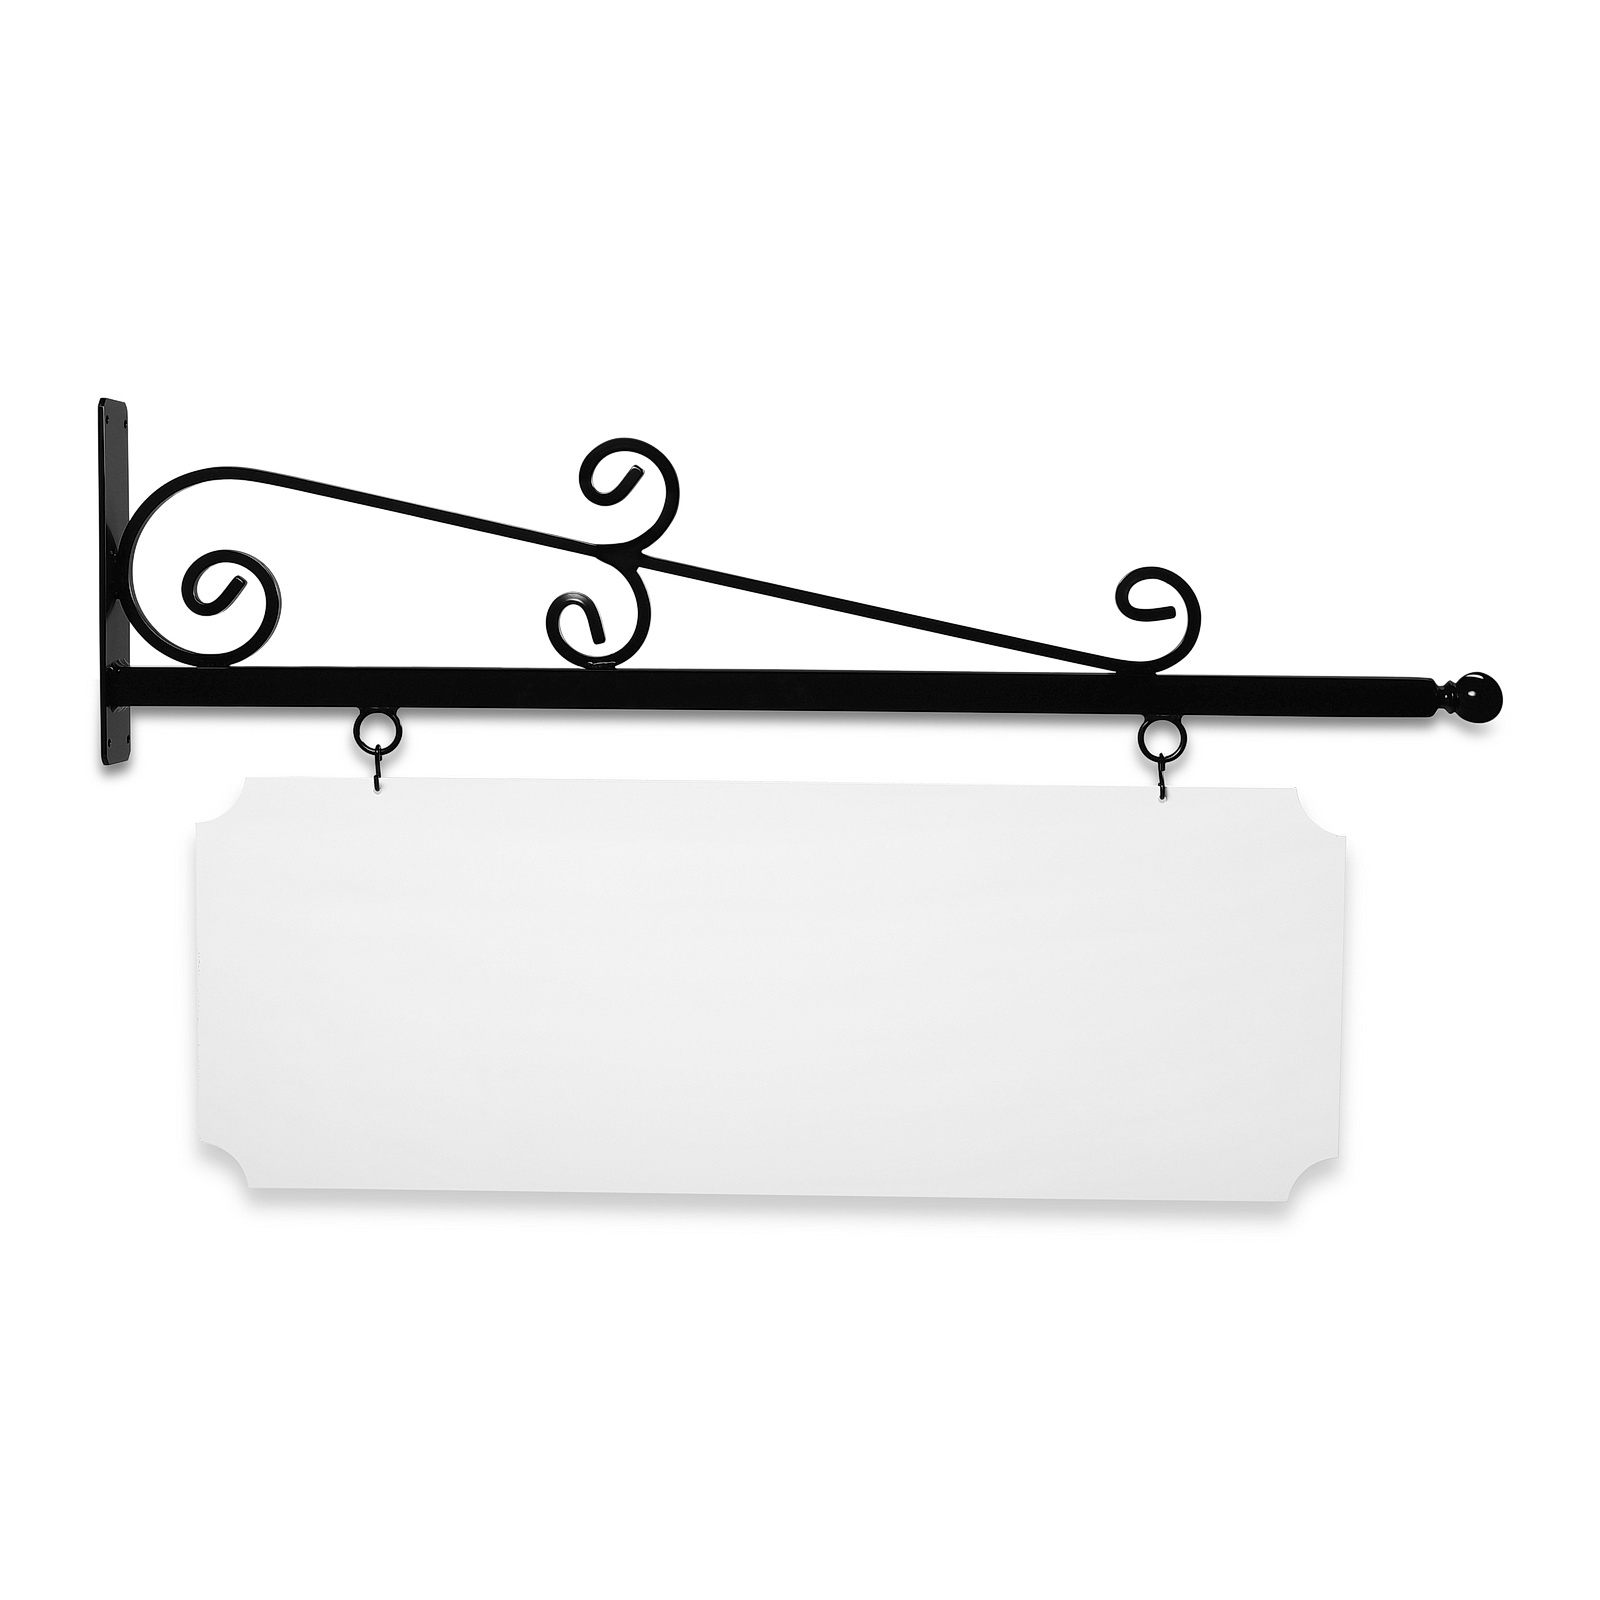 48'' Wide Wispy Style Bracket in  Black Powder Coated Aluminum with 16'' Tall X 44'' Wide X .080'' Thick White Aluminum Sign Blank and 2 Black Powder Coated S-Hooks